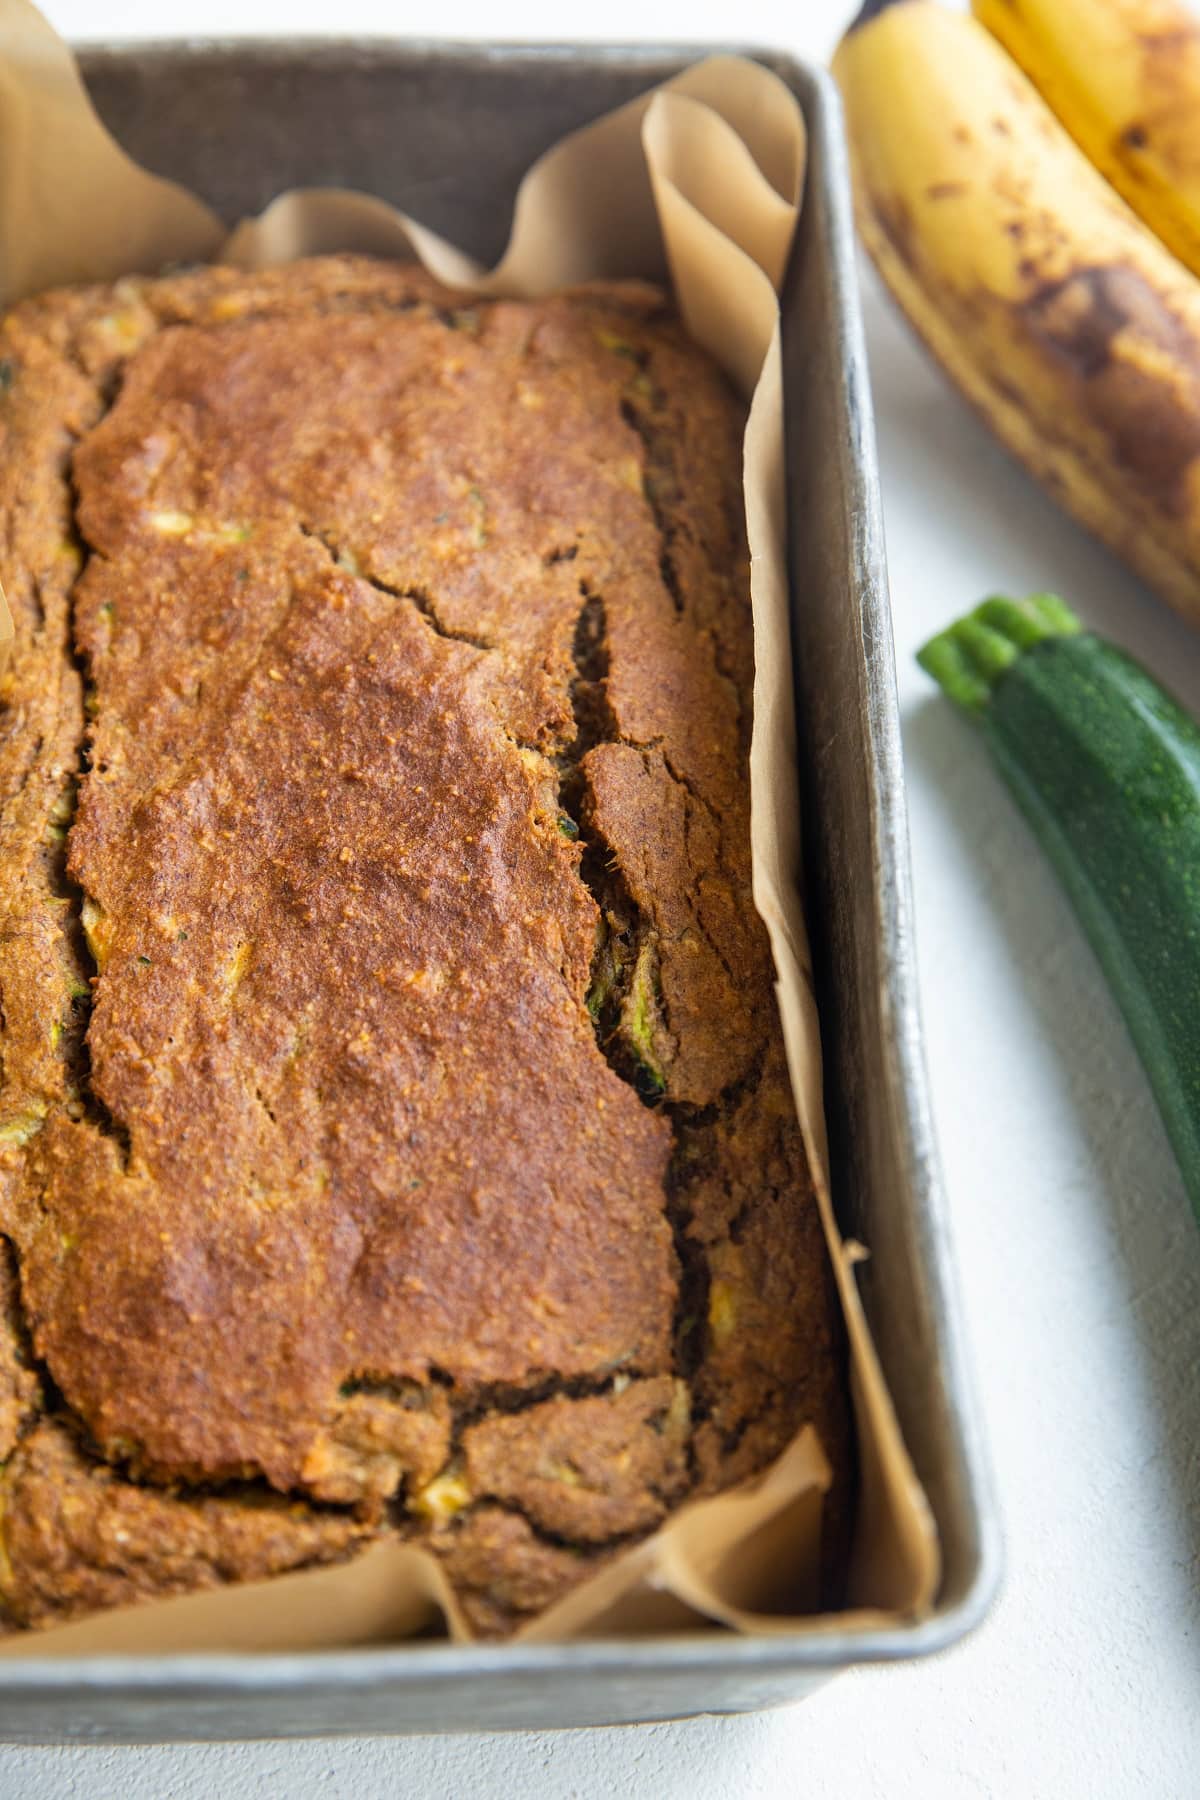 Loaf of zucchini banana bread in a loaf pan with a fresh zucchini and ripe bananas in the background.